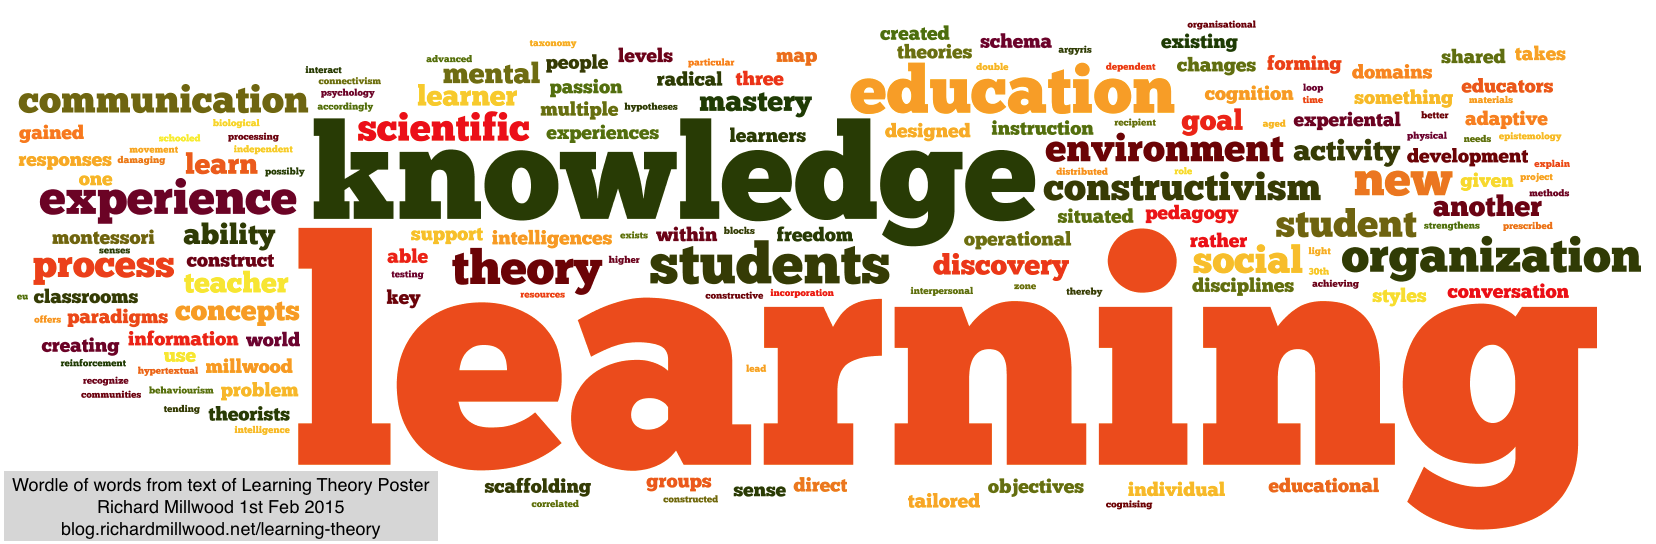 Worldle tag cloud of words in learning theory poster